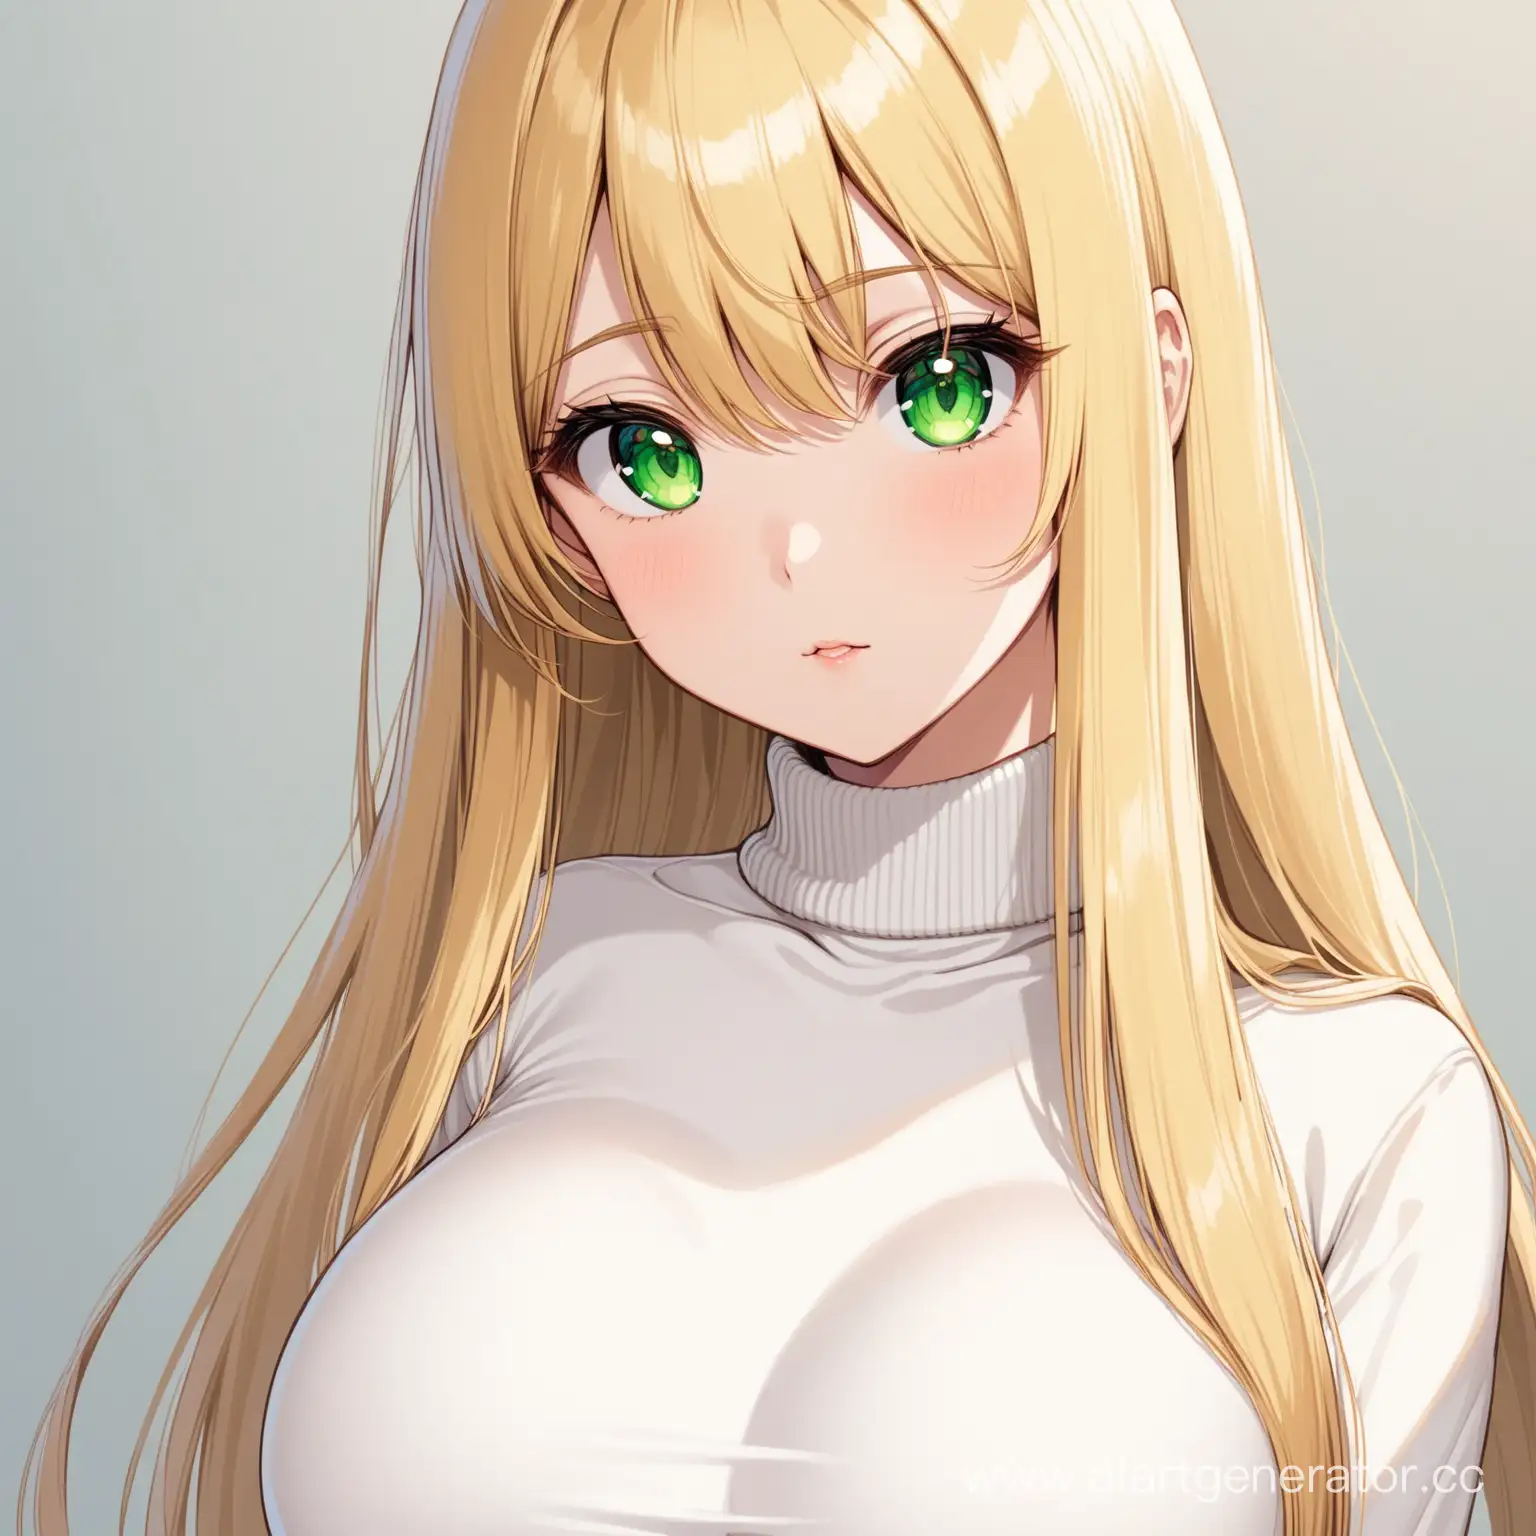 A low girl, big breasts, long straight blonde hair and big green eyes, she is wearing a white turtleneck 